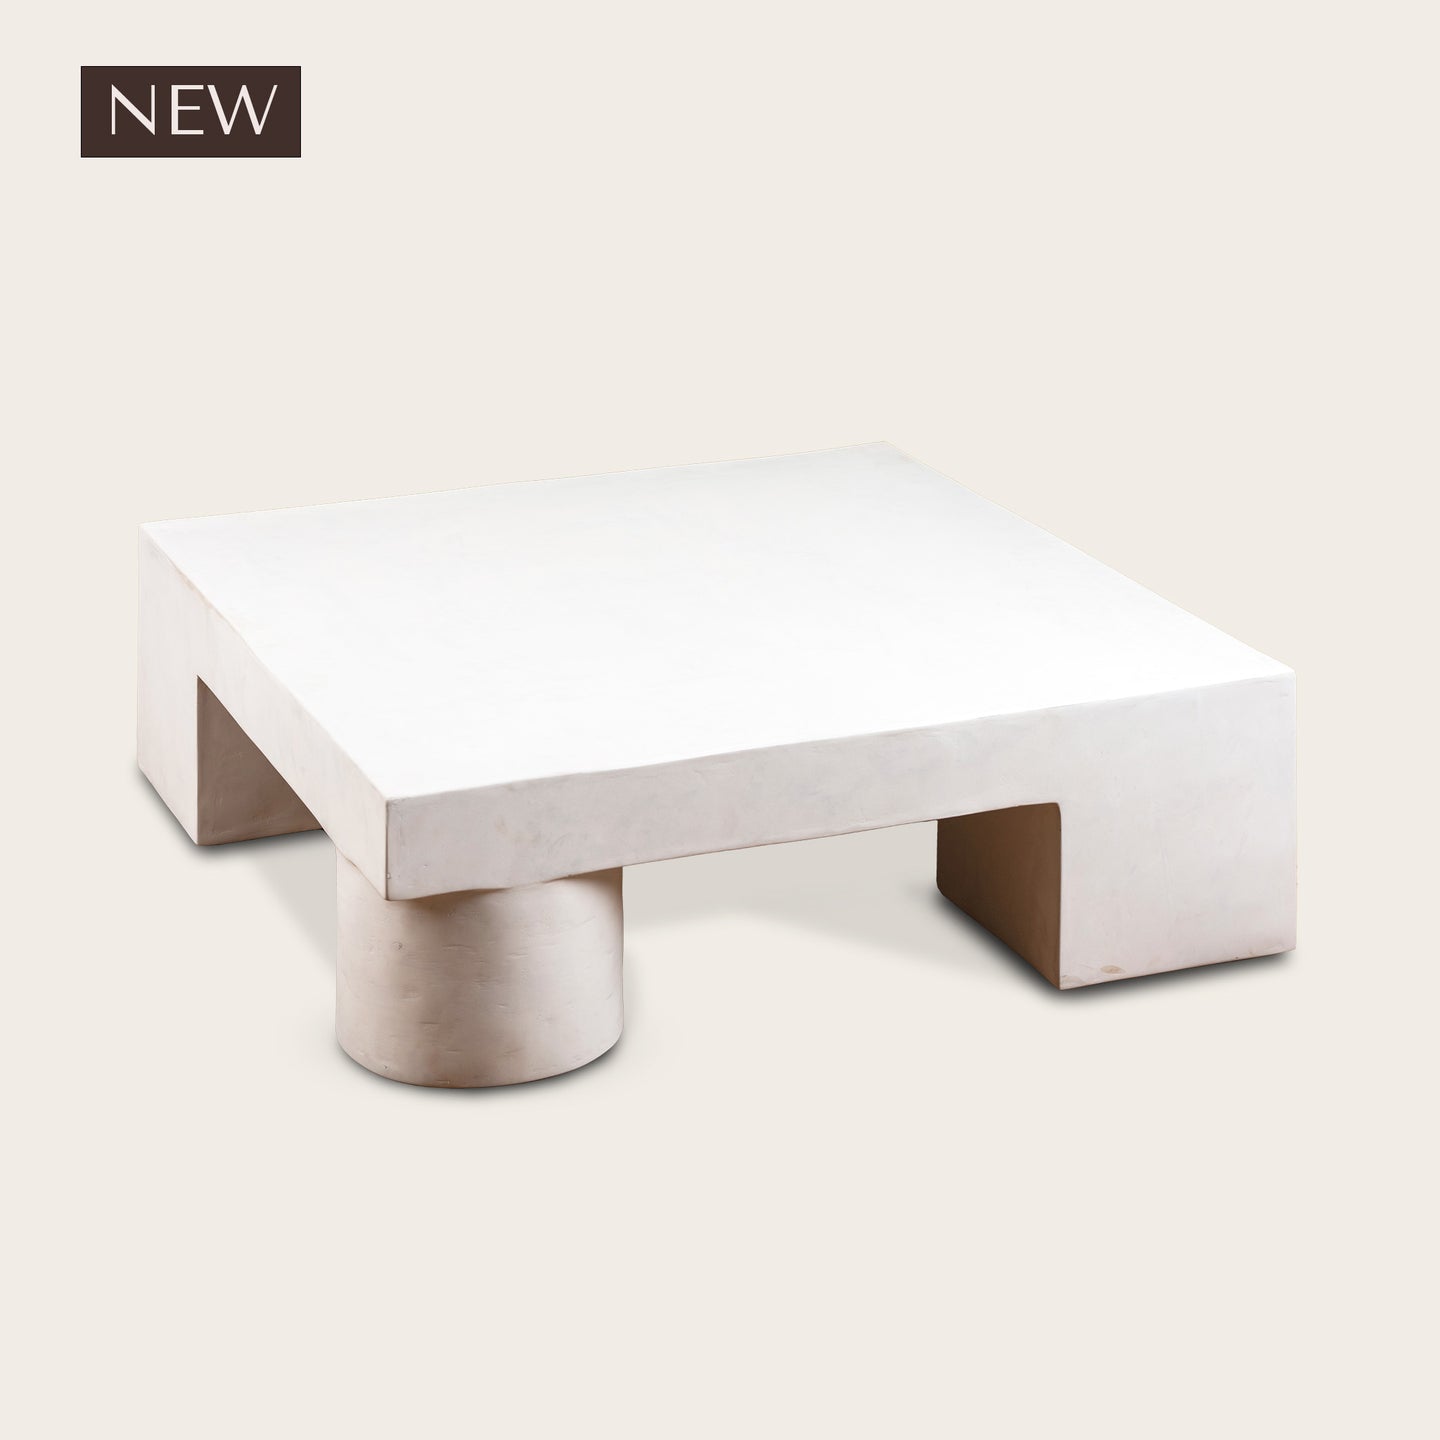 The Cubist Coffee Table Petit